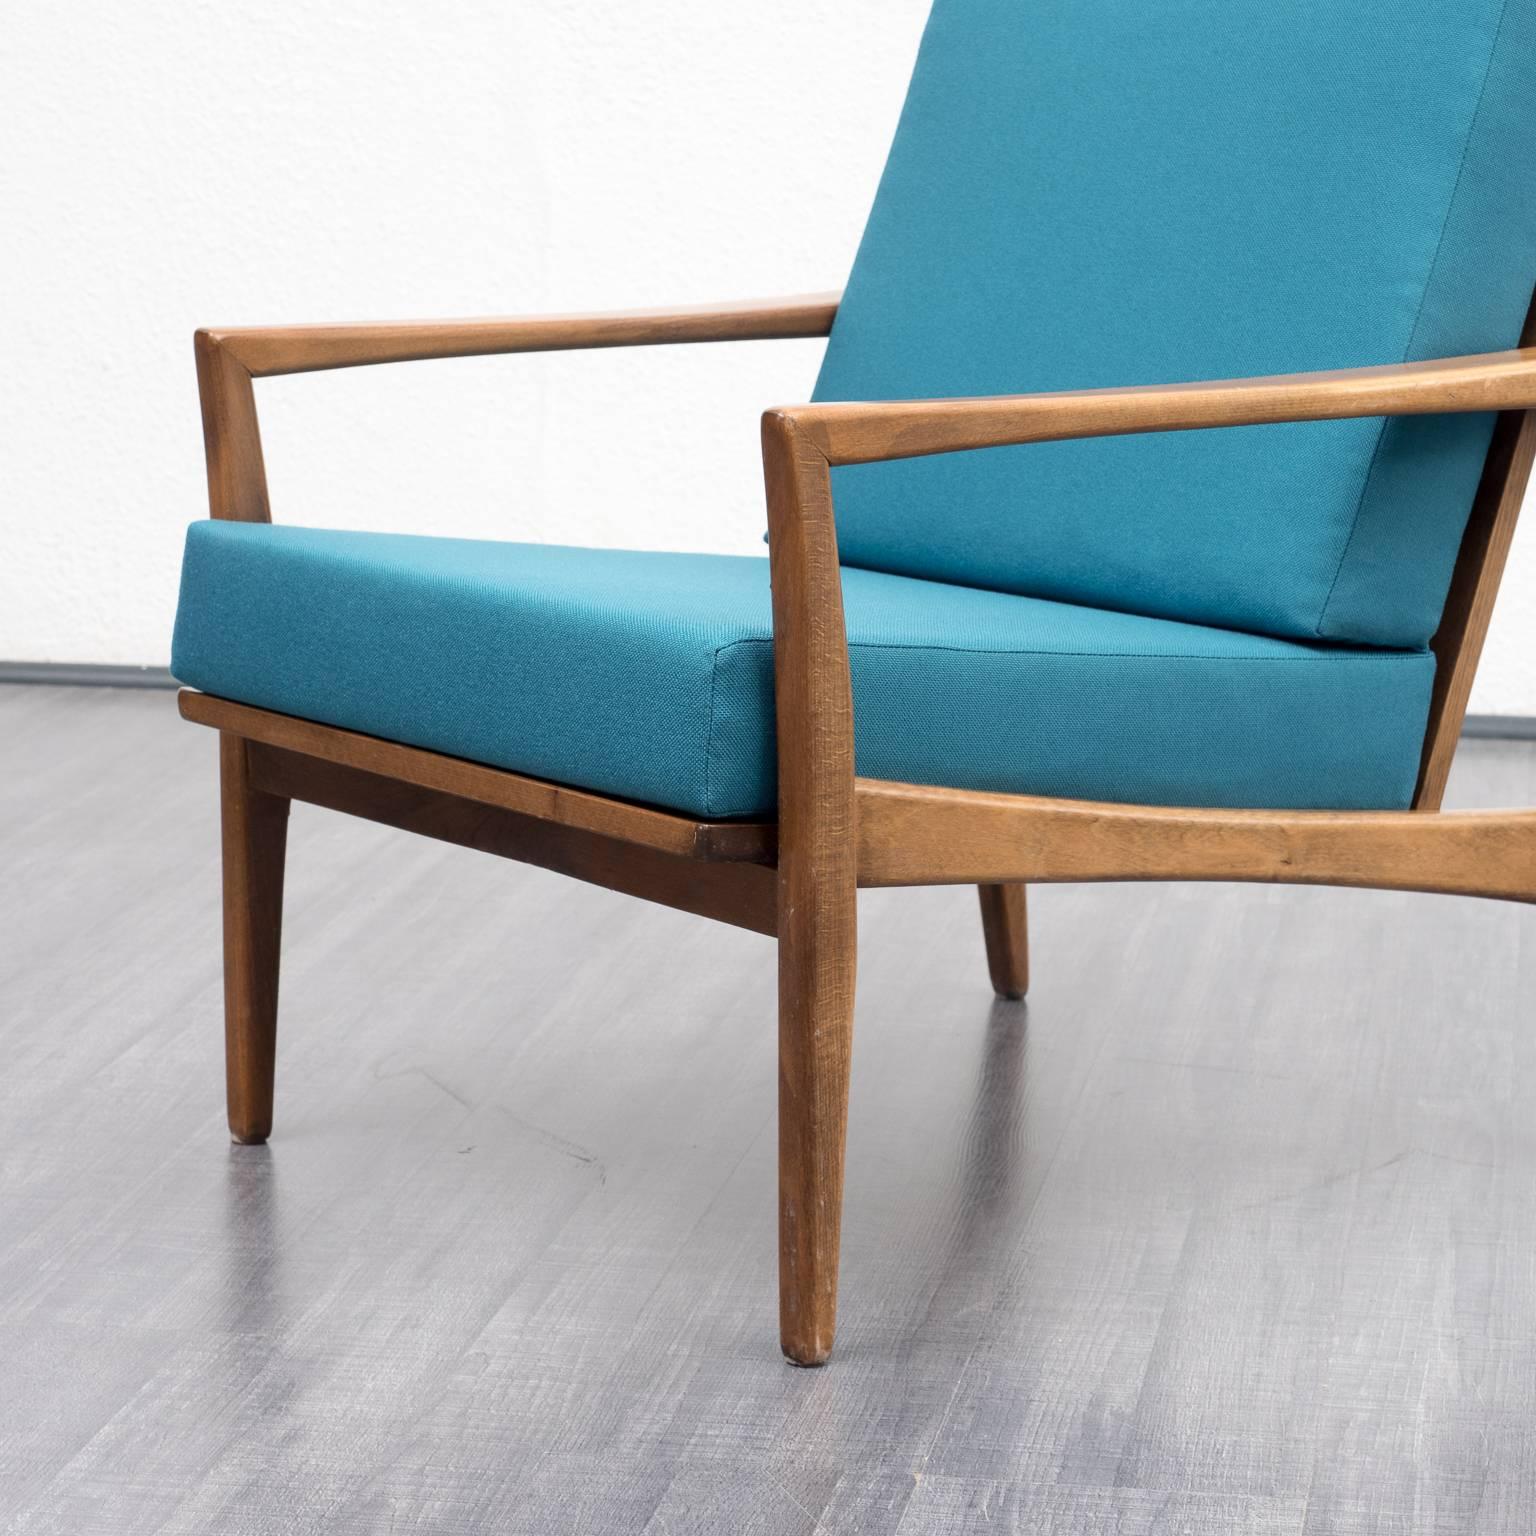 1960s Armchair, Solid Beech, Reupholstered, Petrol Blue In Excellent Condition For Sale In Karlsruhe, DE